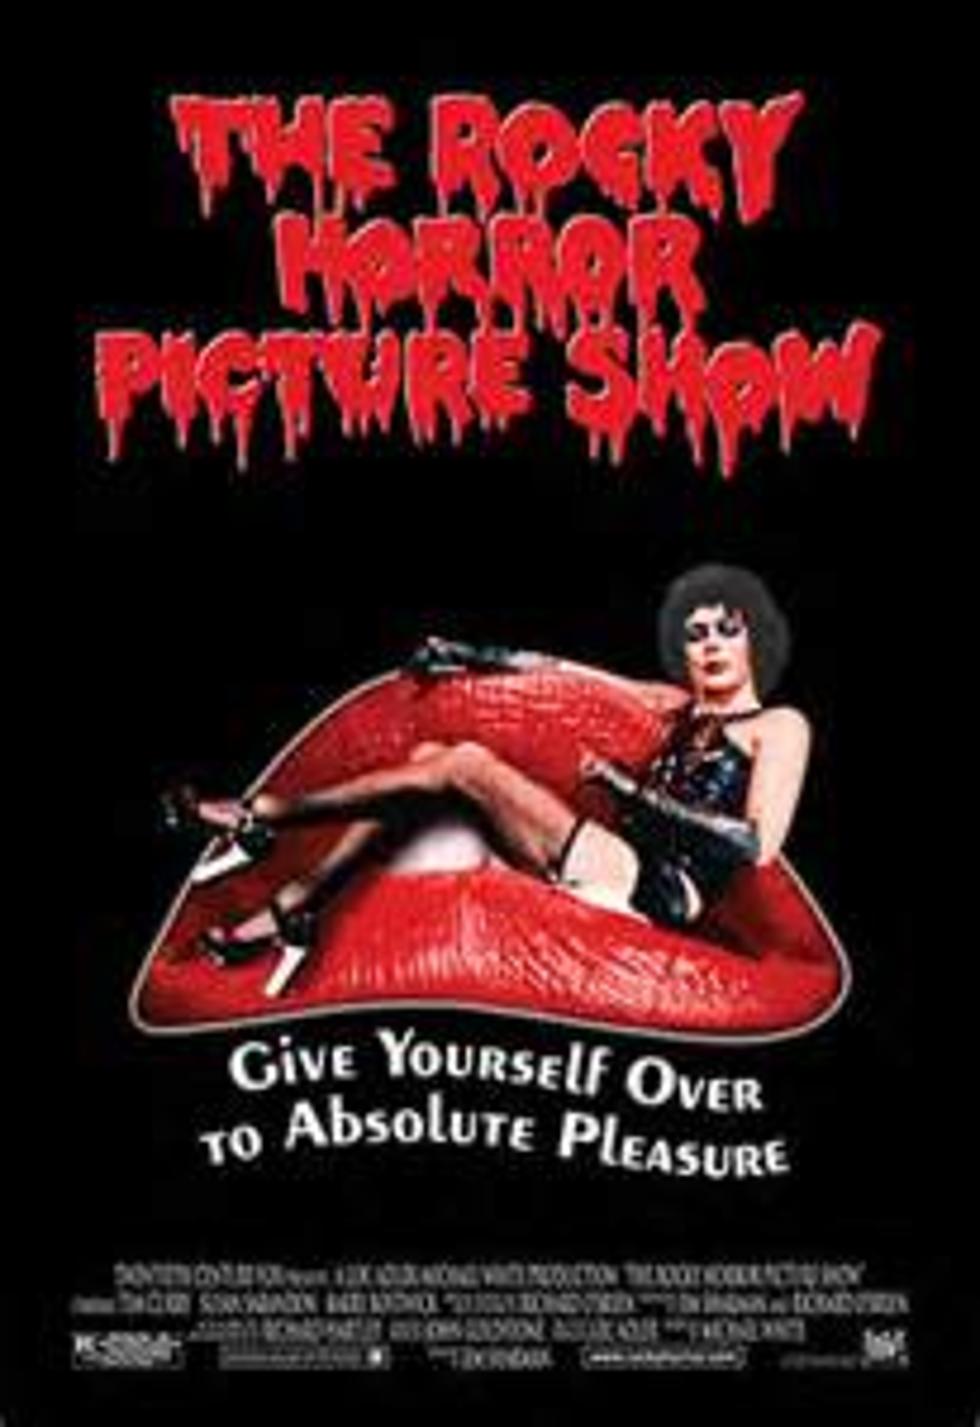 Get Weird at the Rocky Horror Picture Show at MSU